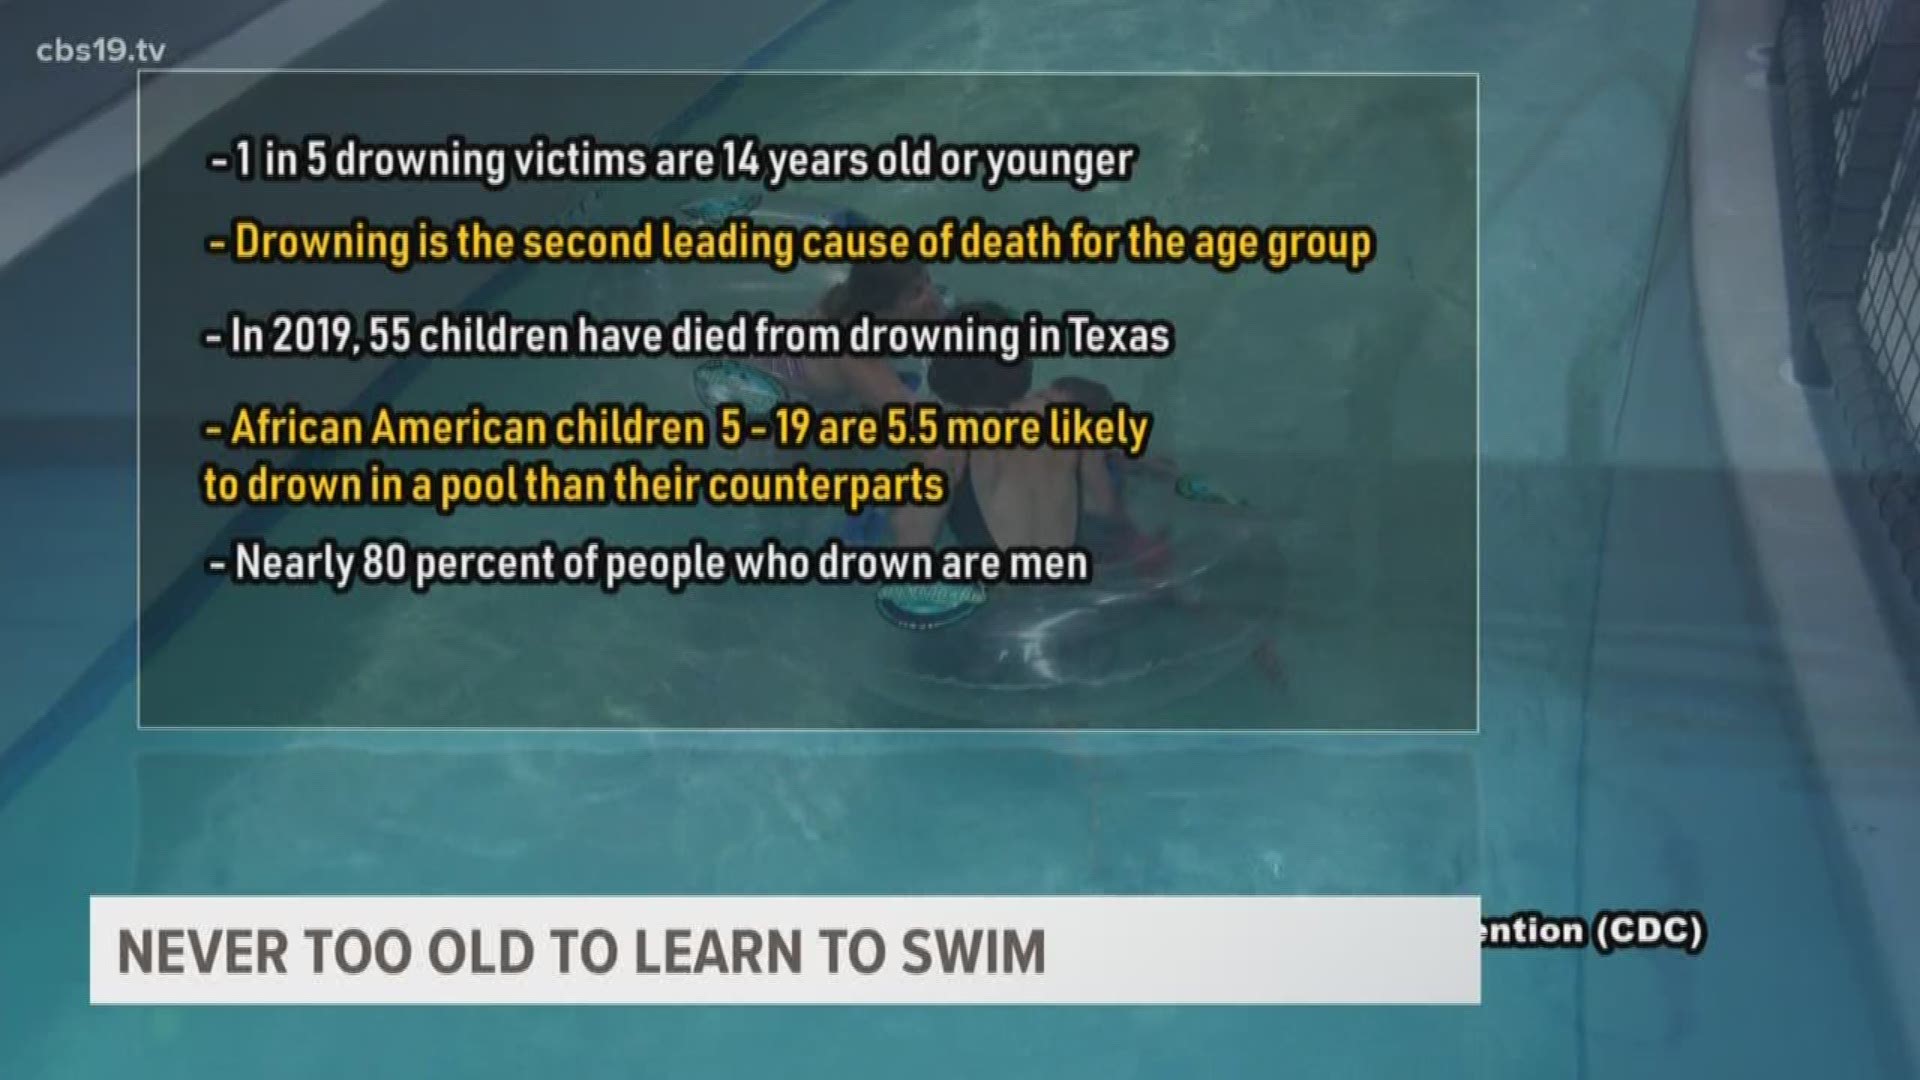 CBS19's LaDyrian Cole shares why she decided to learn to swim, tips she's picked up in her first few lessons, and water safety statistics every parent should know.